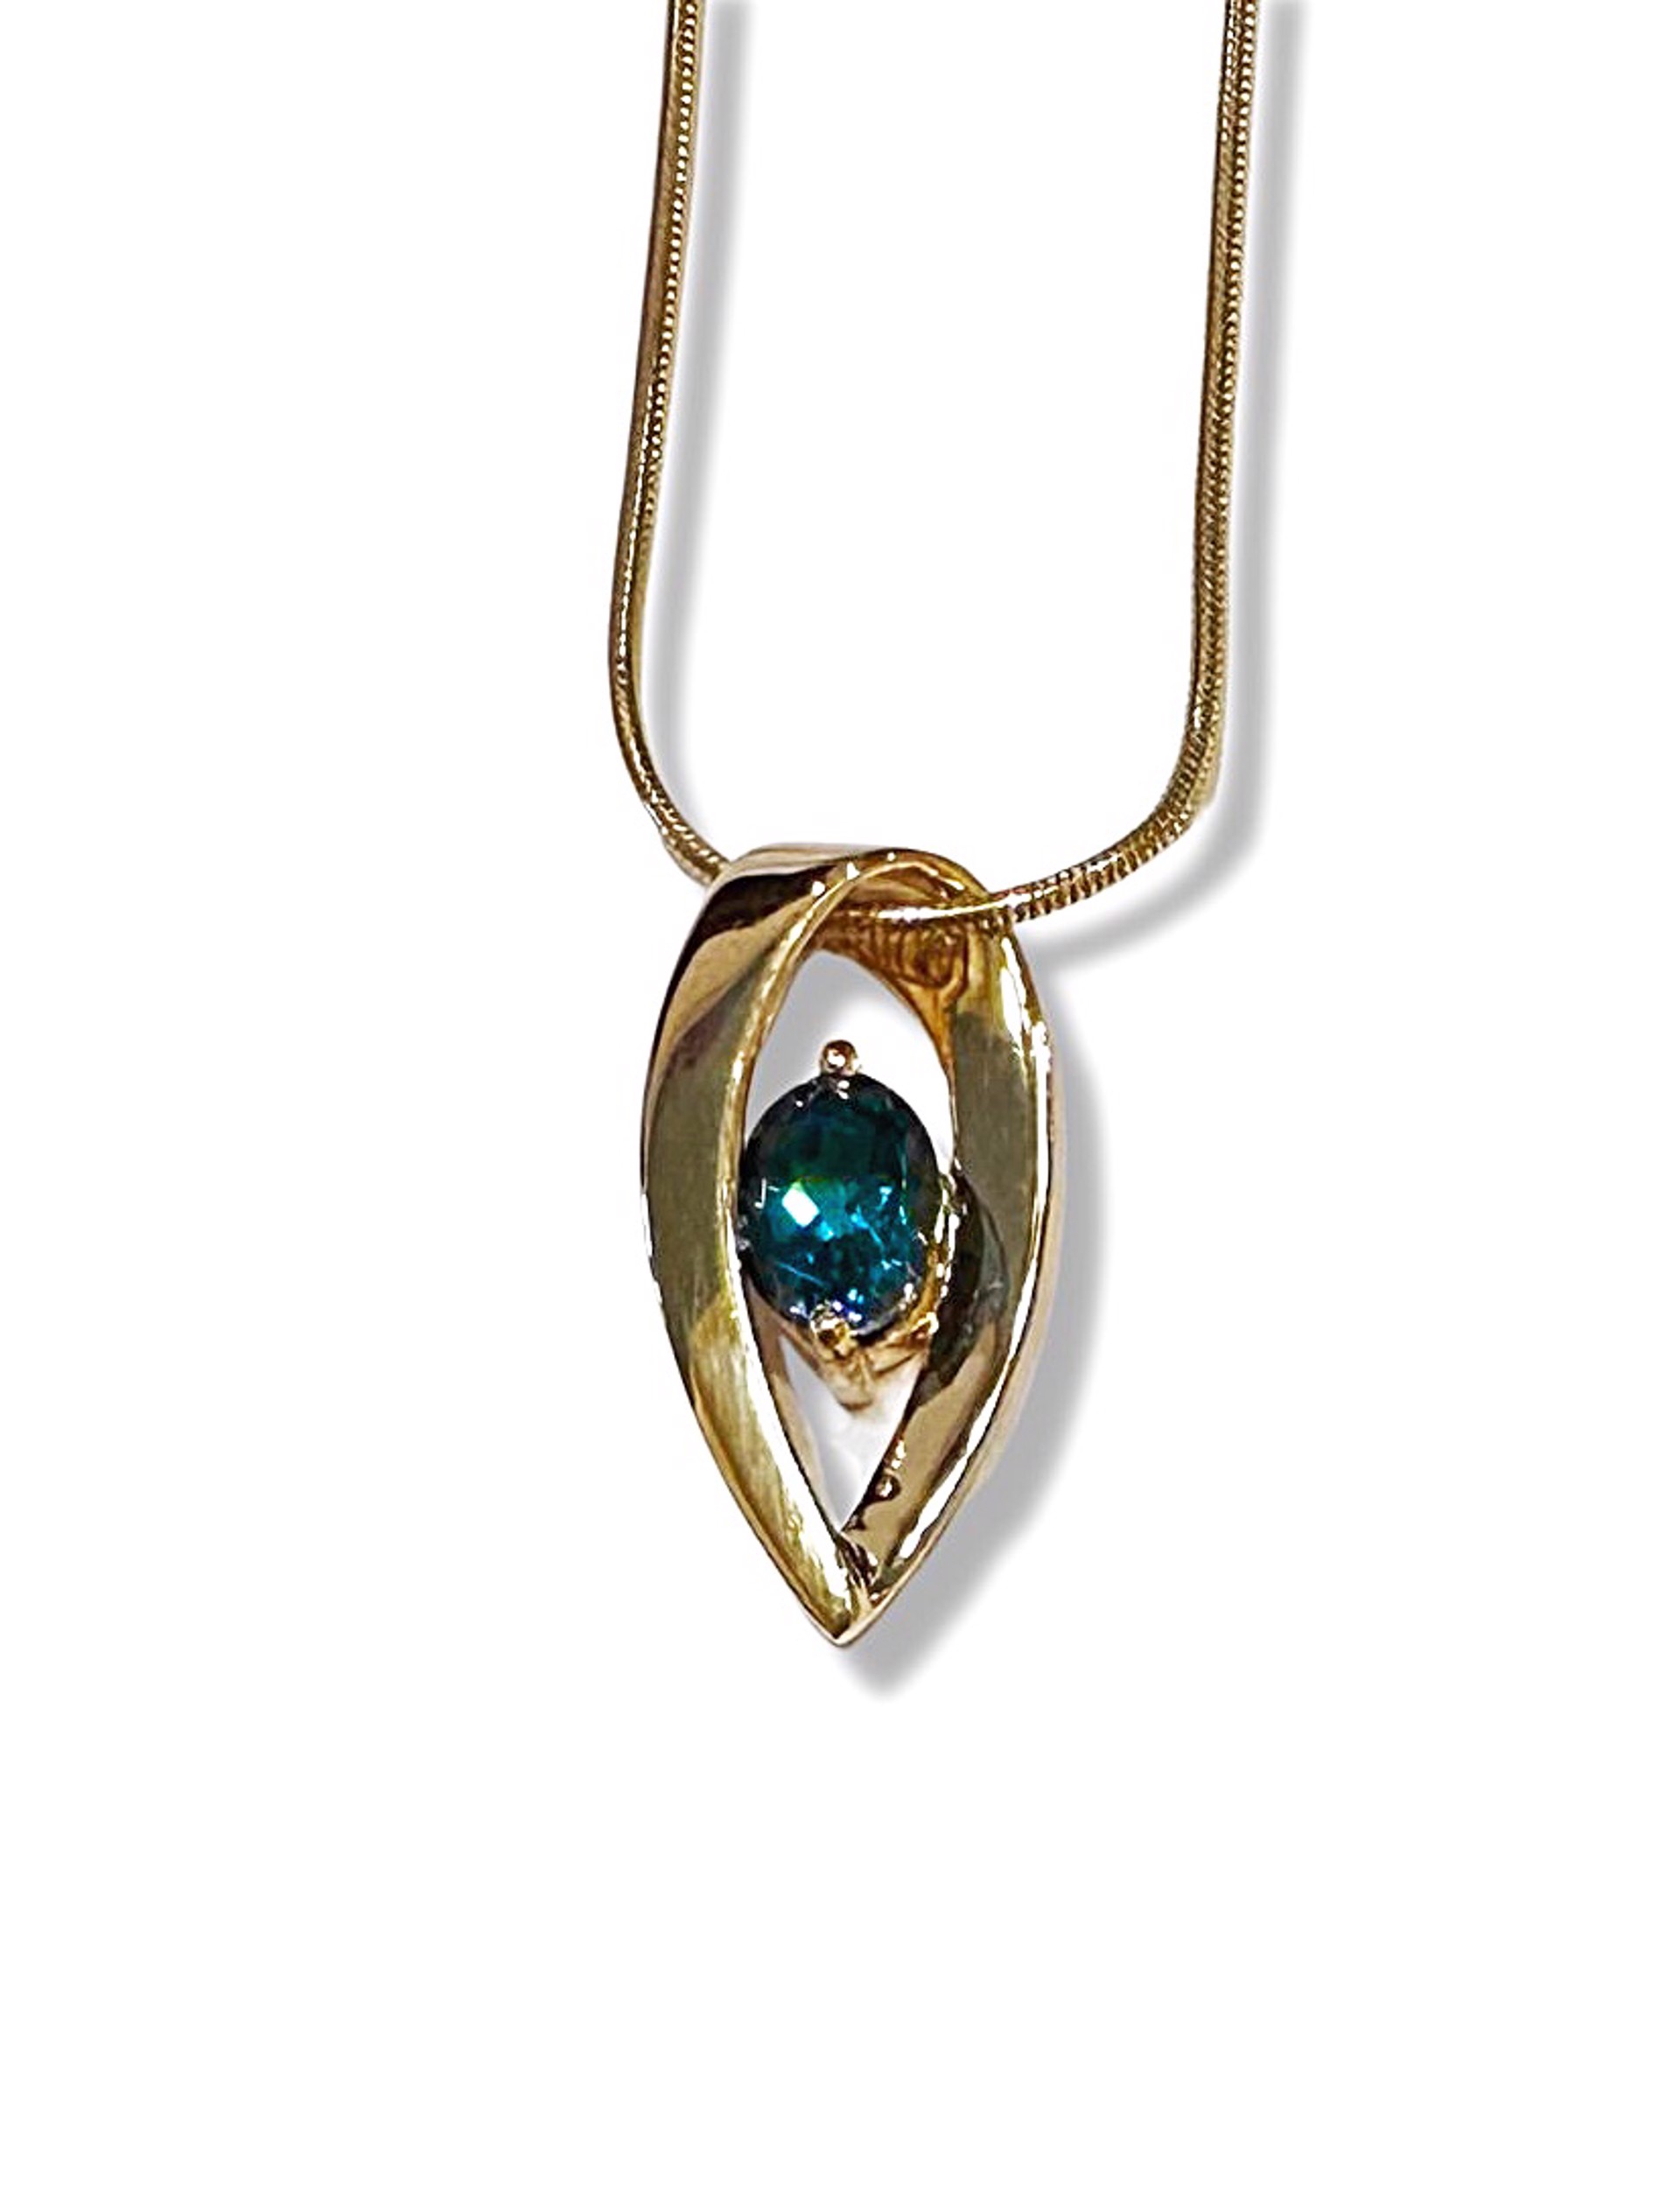 Pendant - London Blue Topaz With Gold Plated Droplet P7320 by Joryel Vera